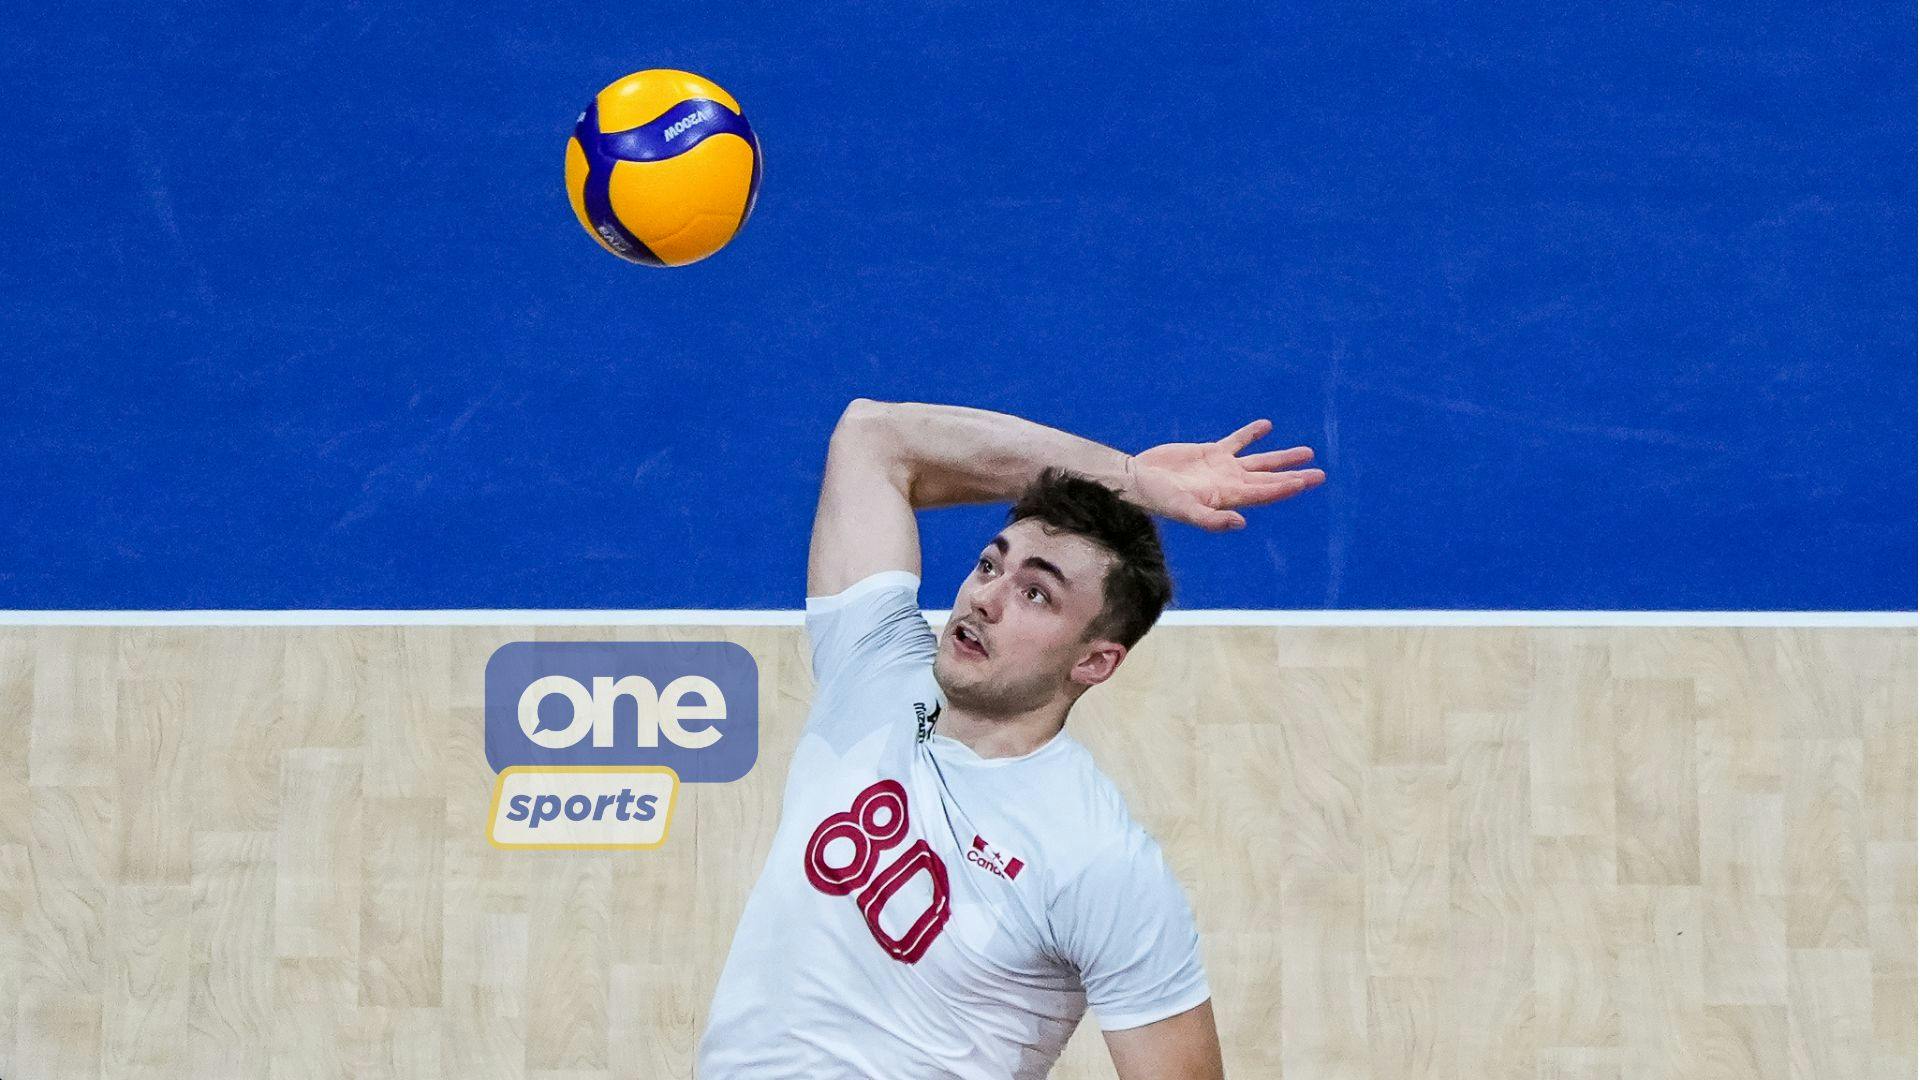 VNL: Eric Loeppky lauds Canada’s improvements in Manila Leg after stunning win over Brazil